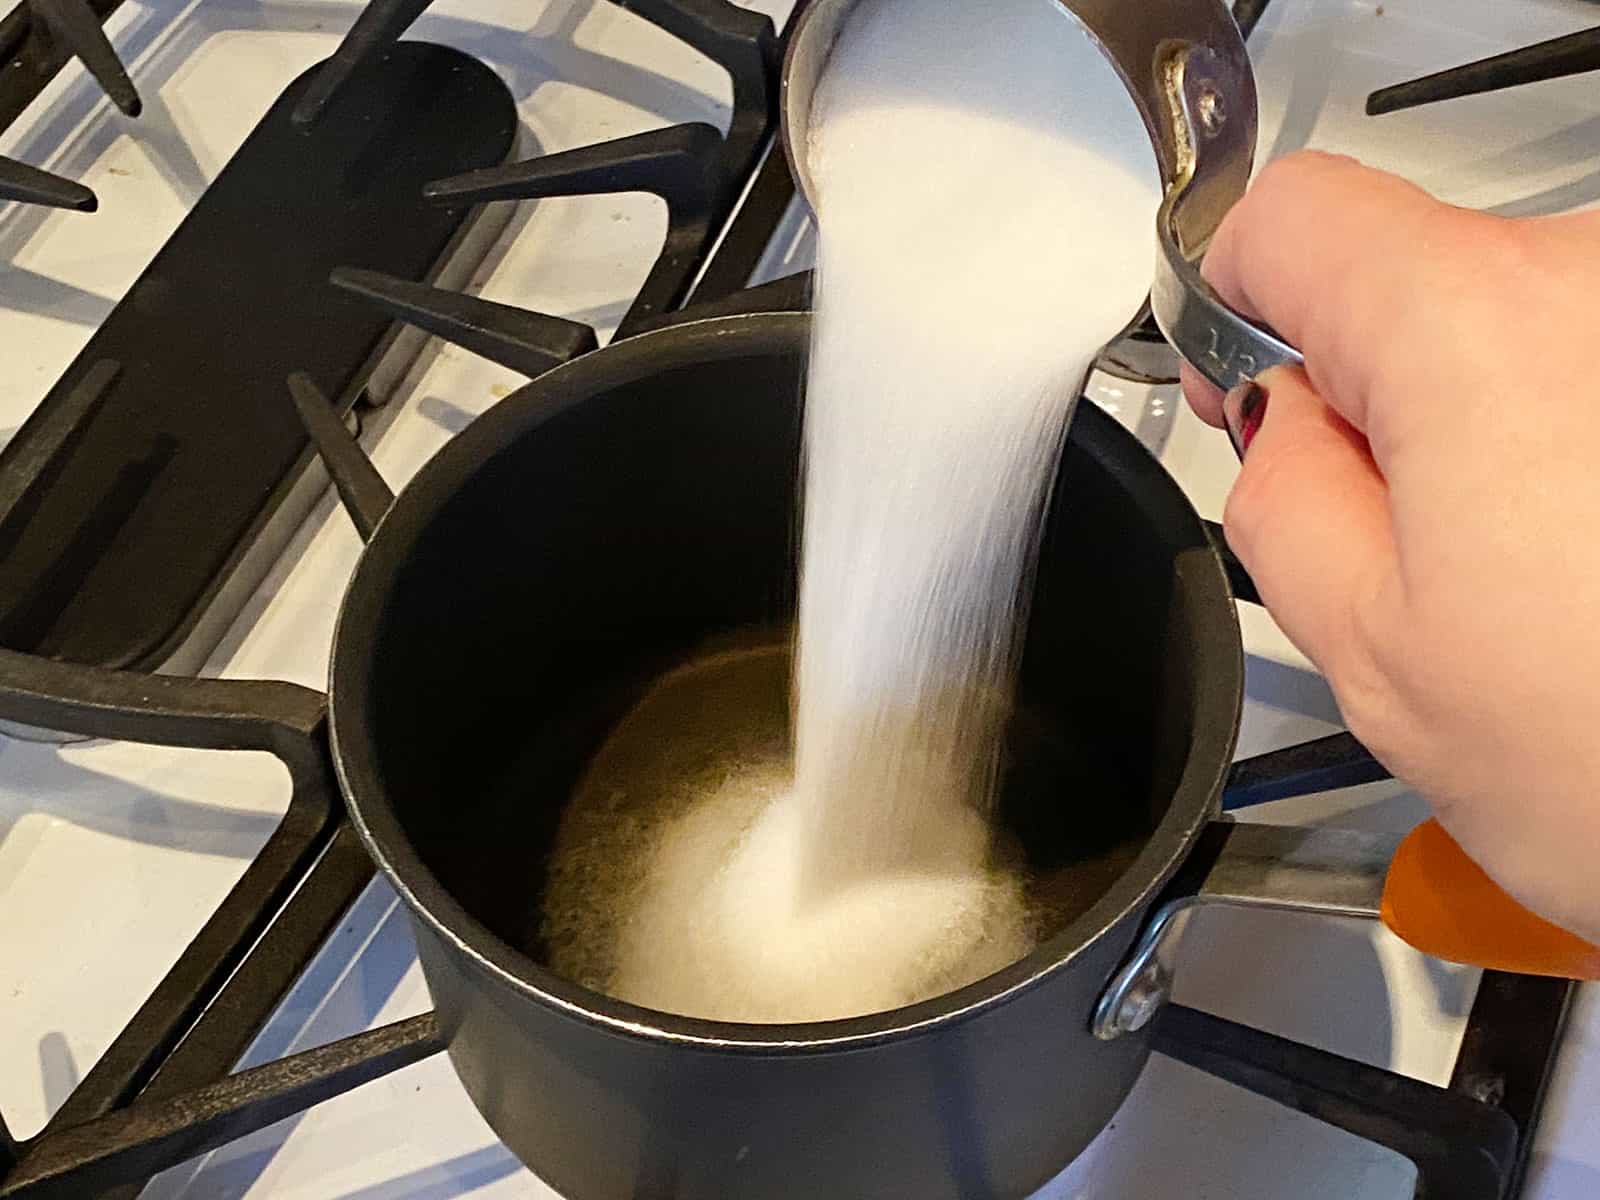 Sugar being poured into a small pot of hot water